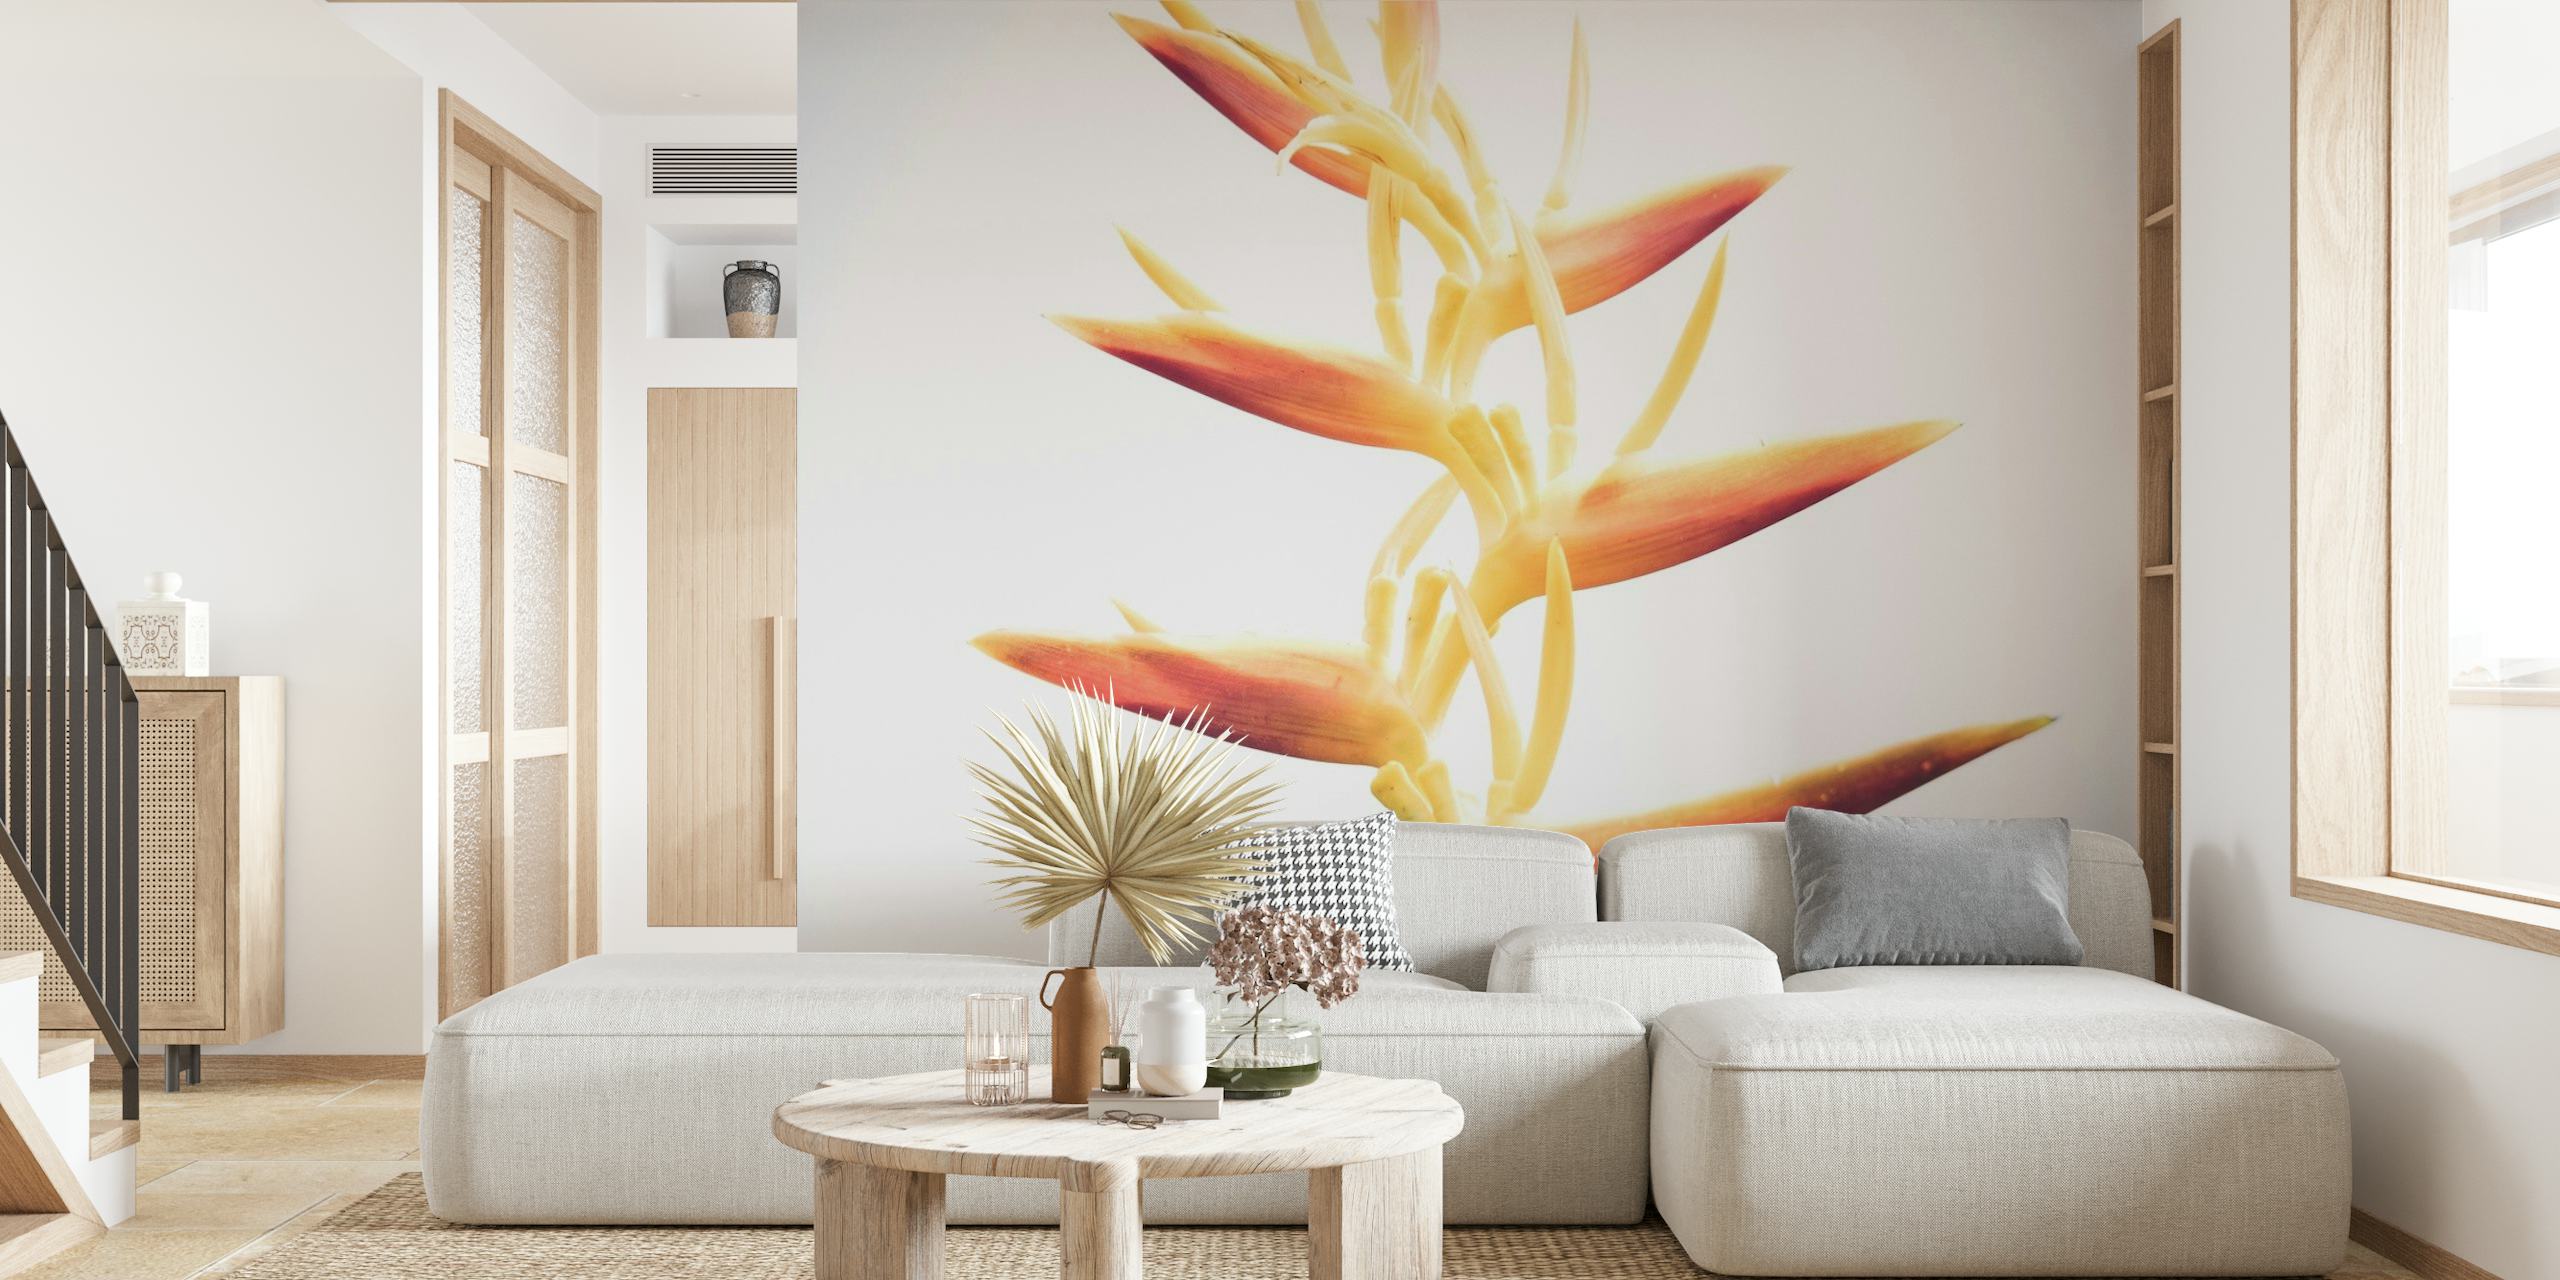 Heliconia flower wall mural with orange and yellow tones on a white background